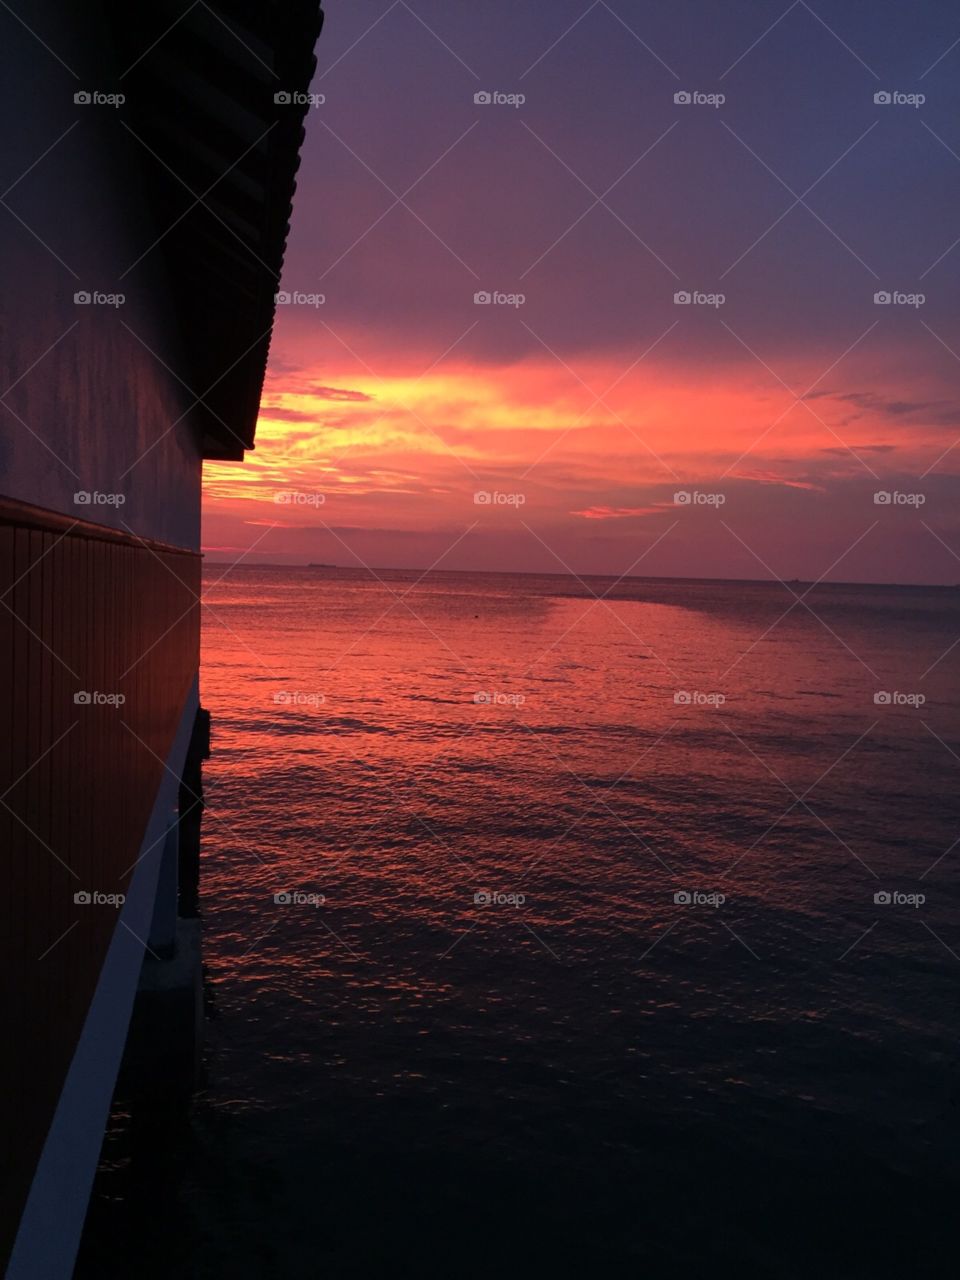 Sunset on the Malacca Straits. Now to take this photo I very nearly dropped my phone into the sea! Taken of the side of the chalet I was staying in. 